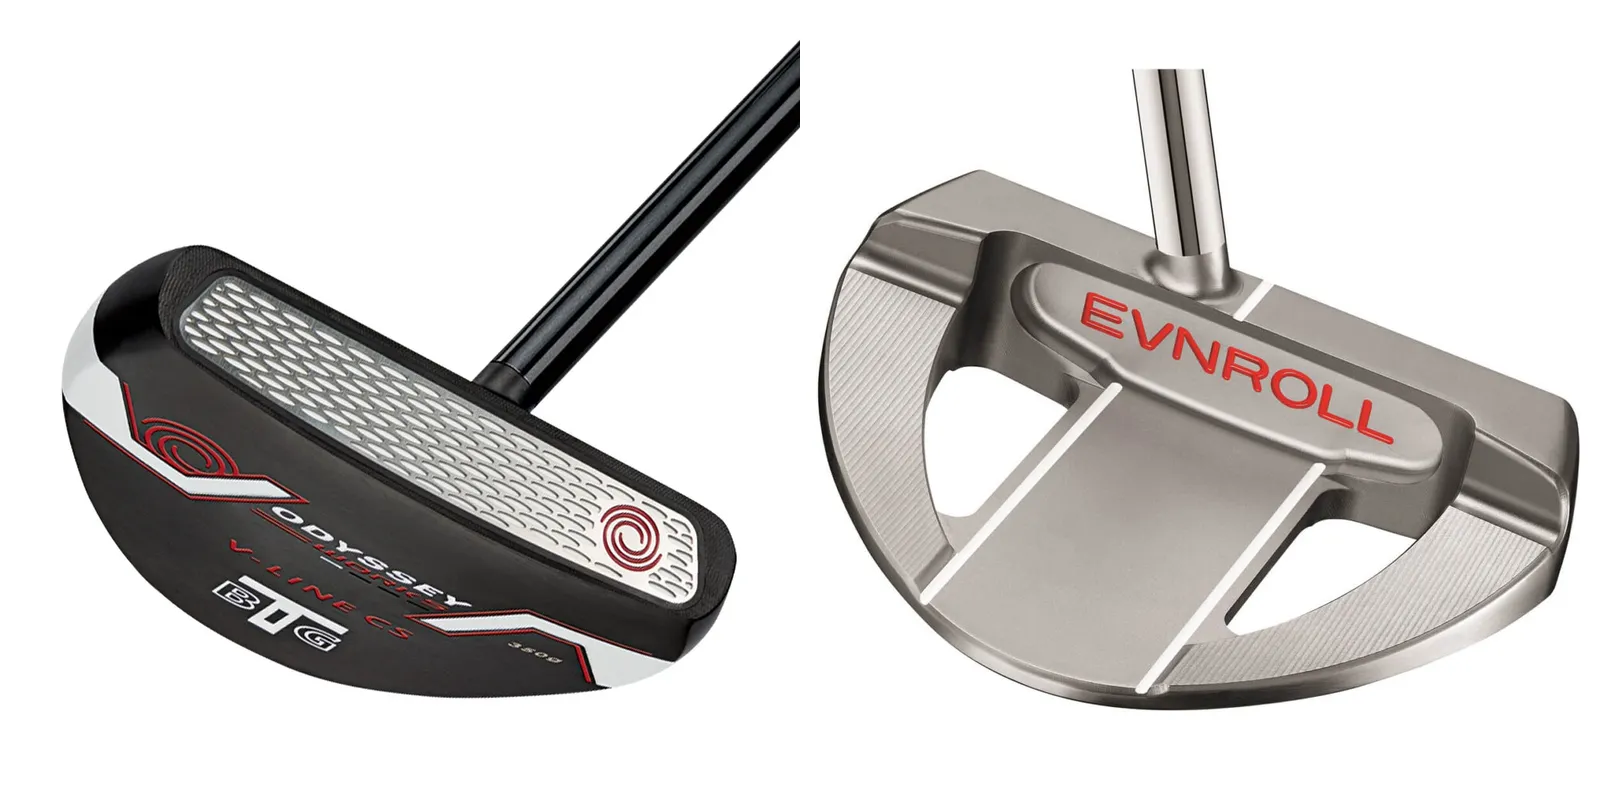 Center Shafted Putters